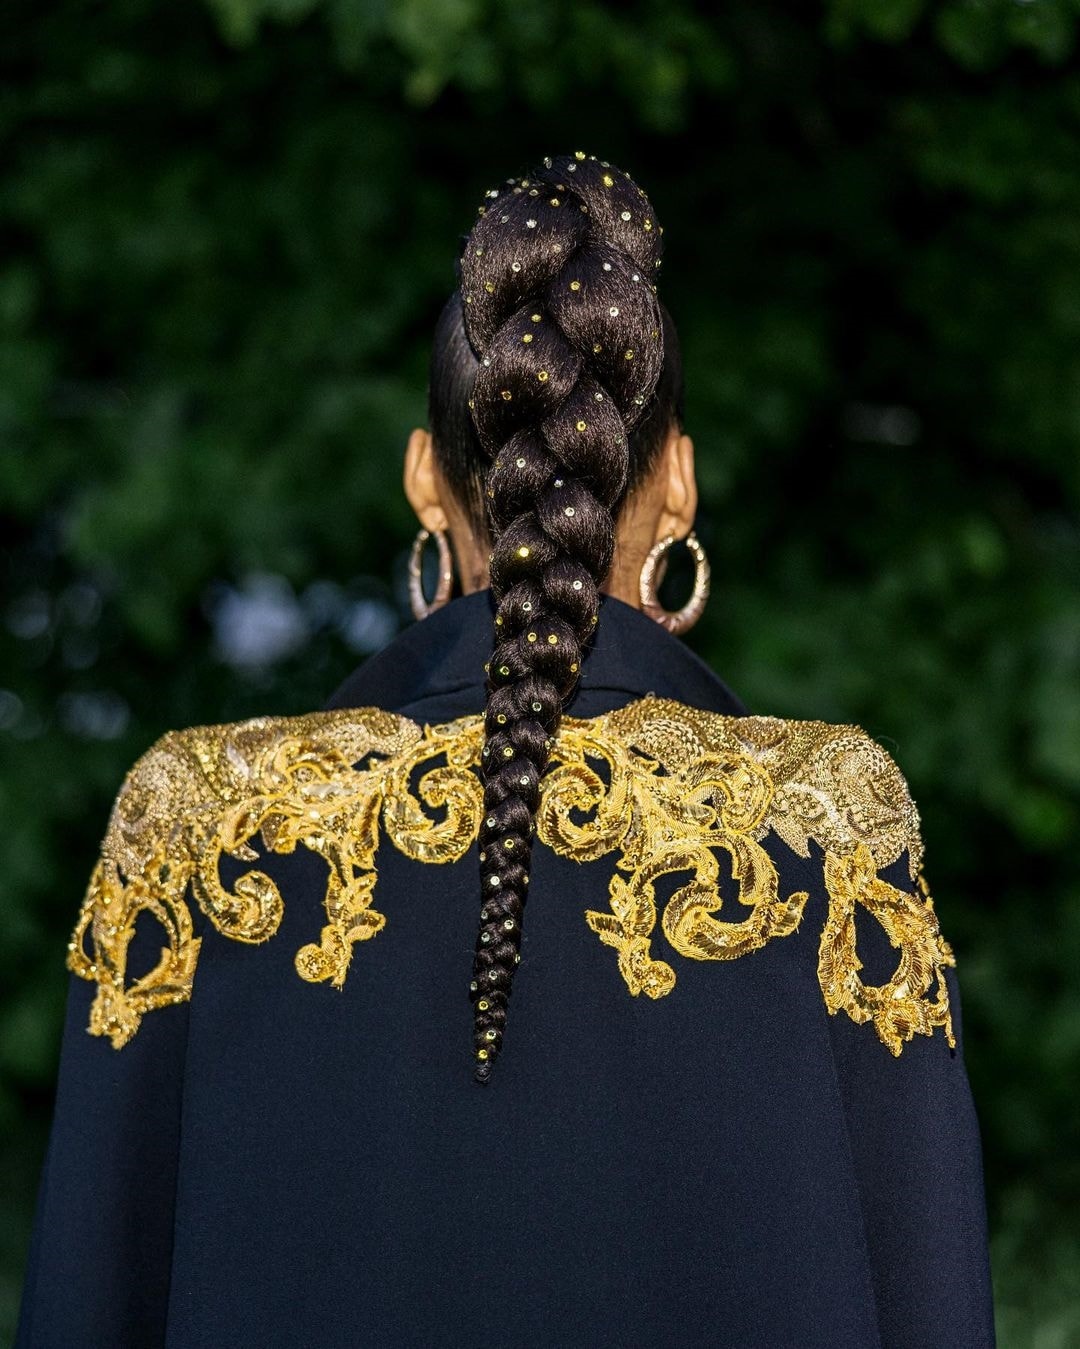 Alicia Keys shared a detailed look at the gold embroidery on her cape and the gold speckles on her braid